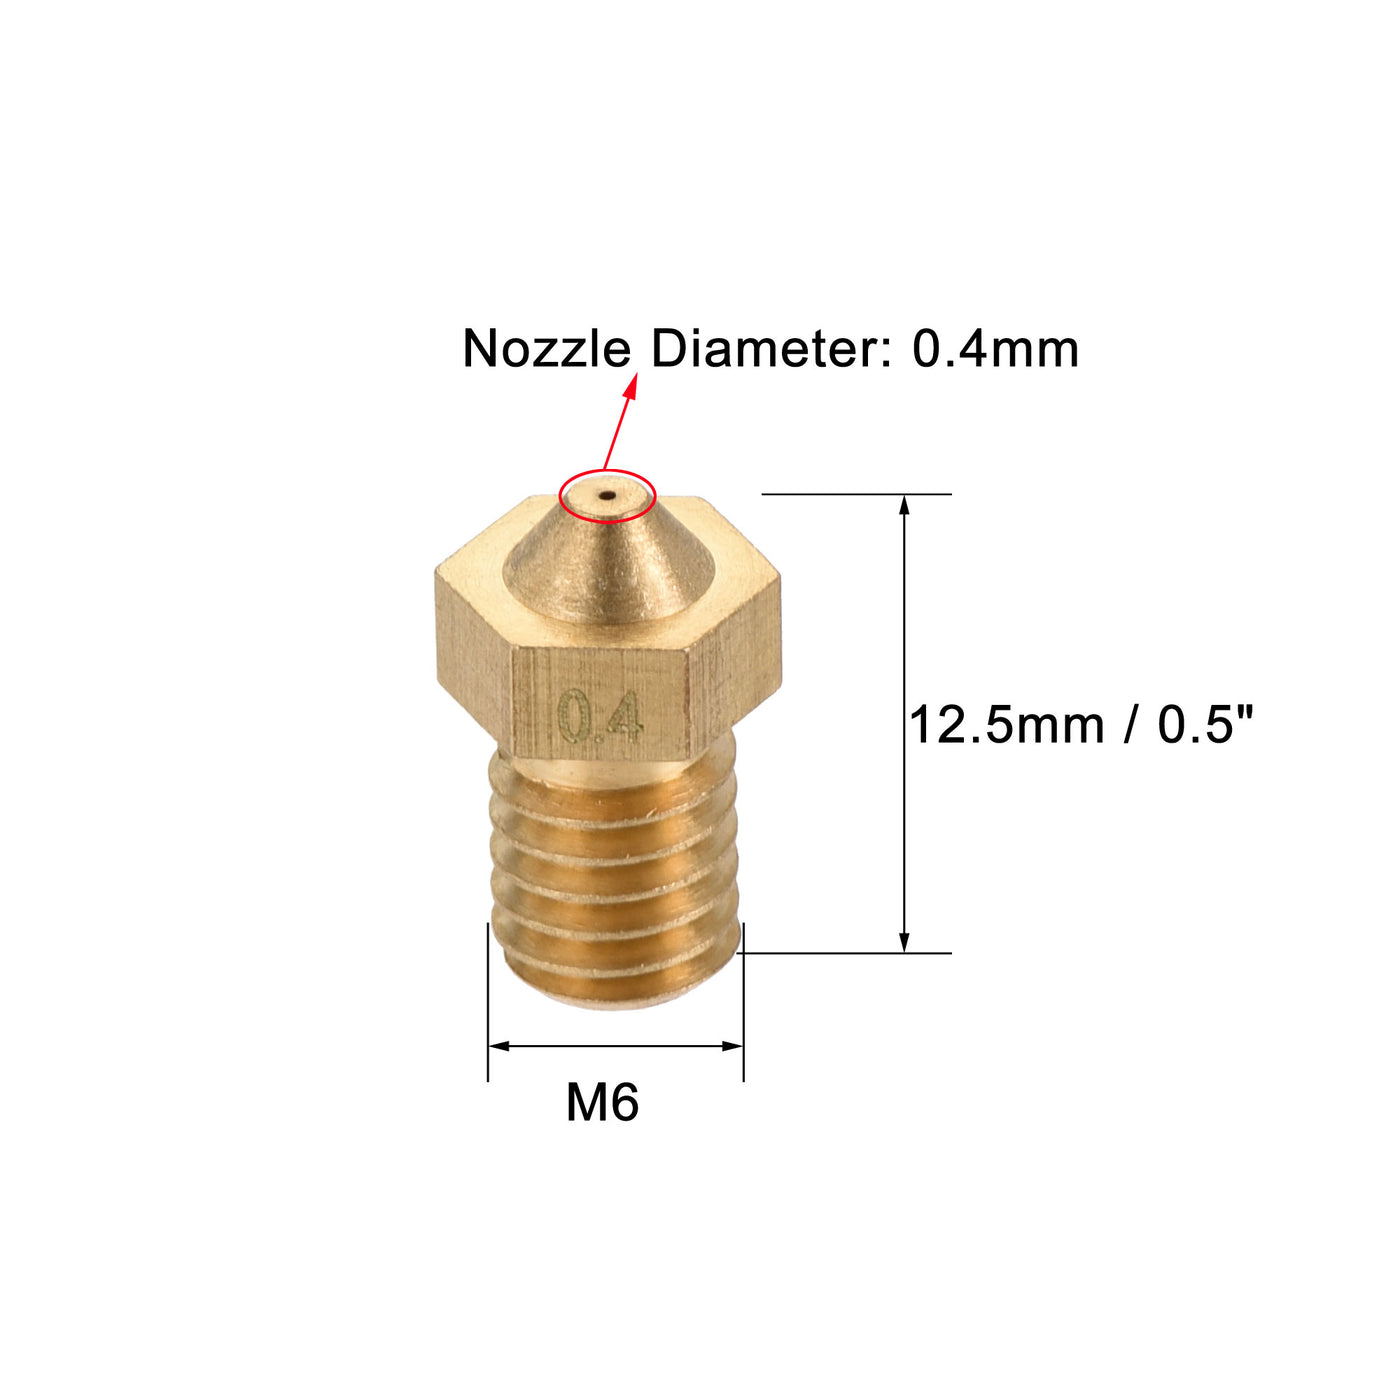 uxcell Uxcell 0.4mm 3D Printer Nozzle, 14pcs M6 Thread for V5 V6 1.75mm Extruder Print, Brass